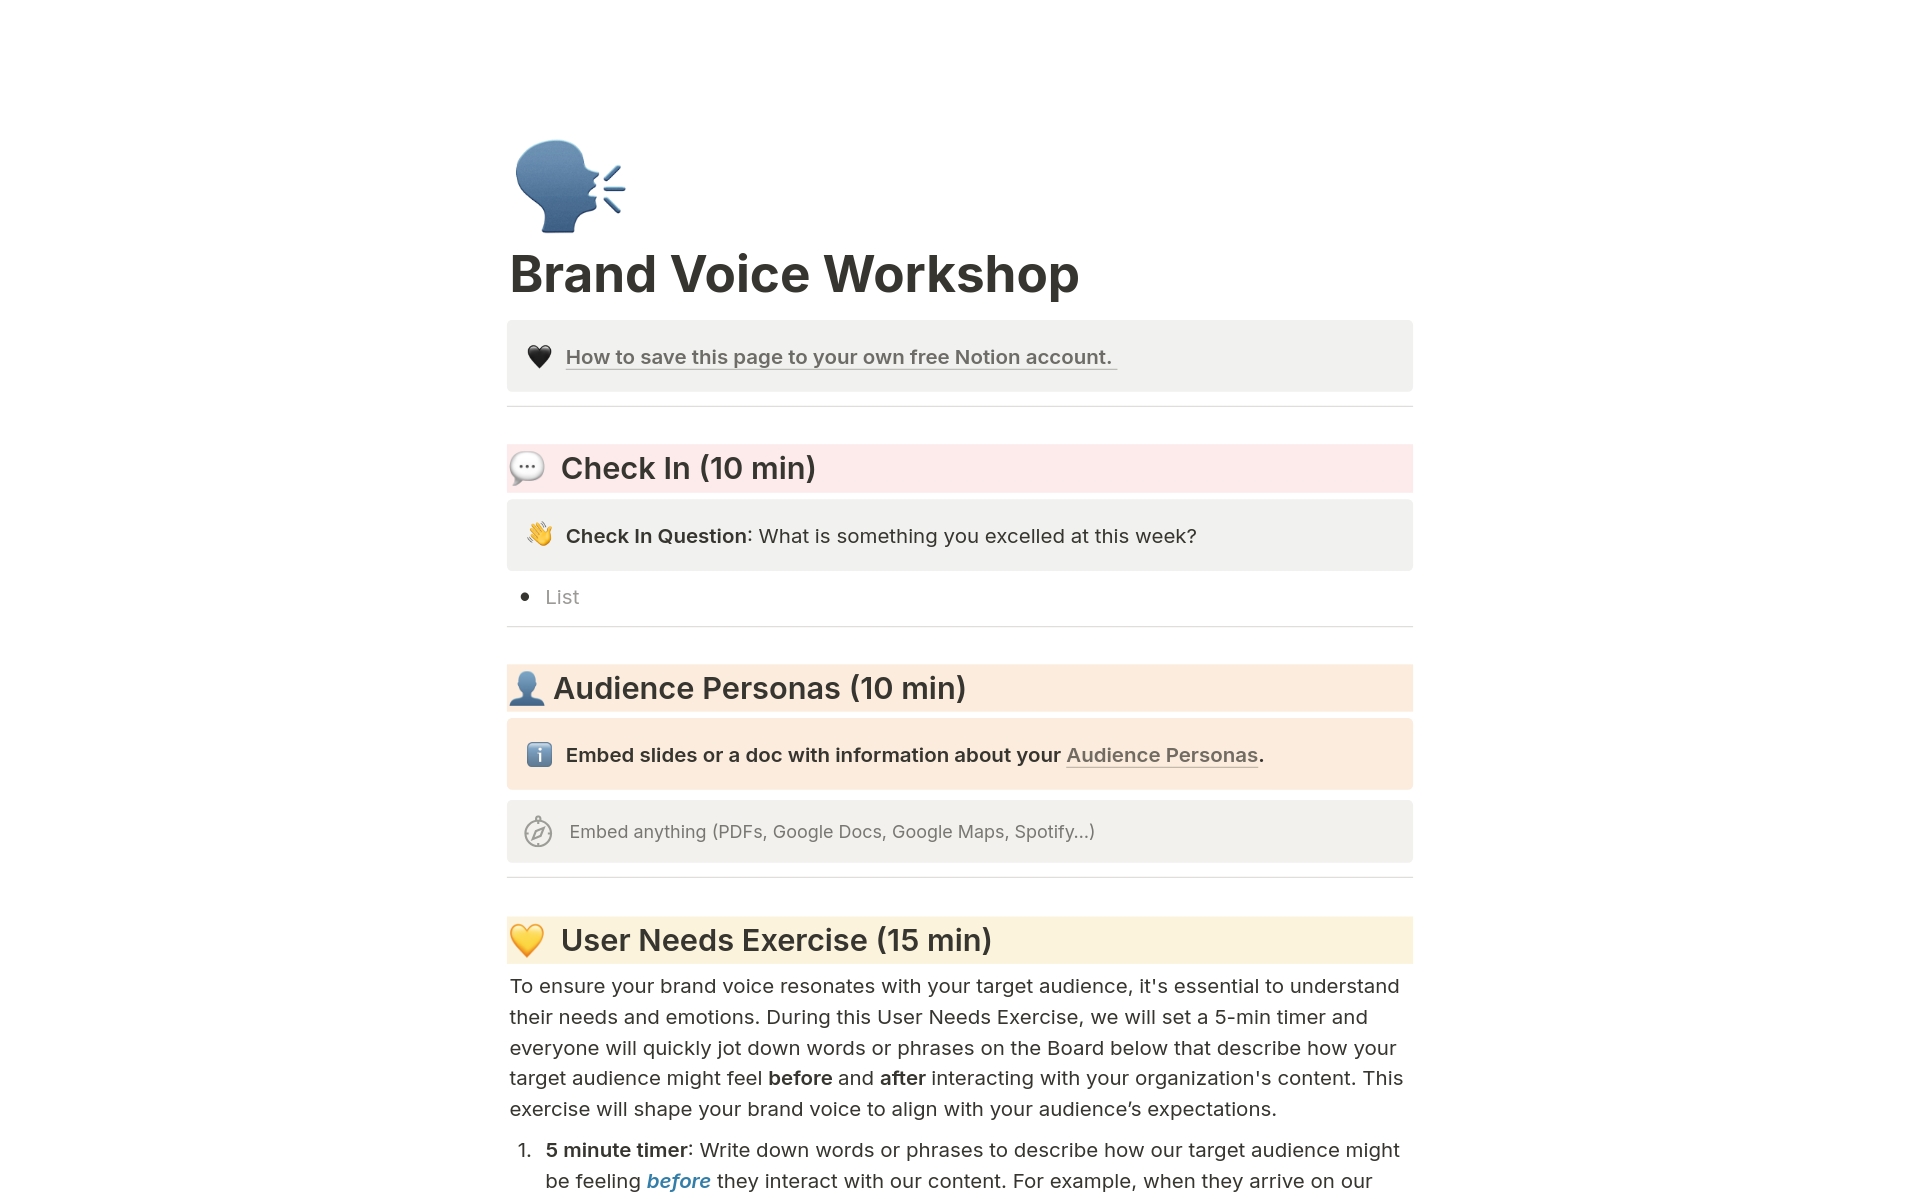 Work collaboratively with your team in this one-hour workshop to define a strong, authentic brand voice that sets your organization apart. 